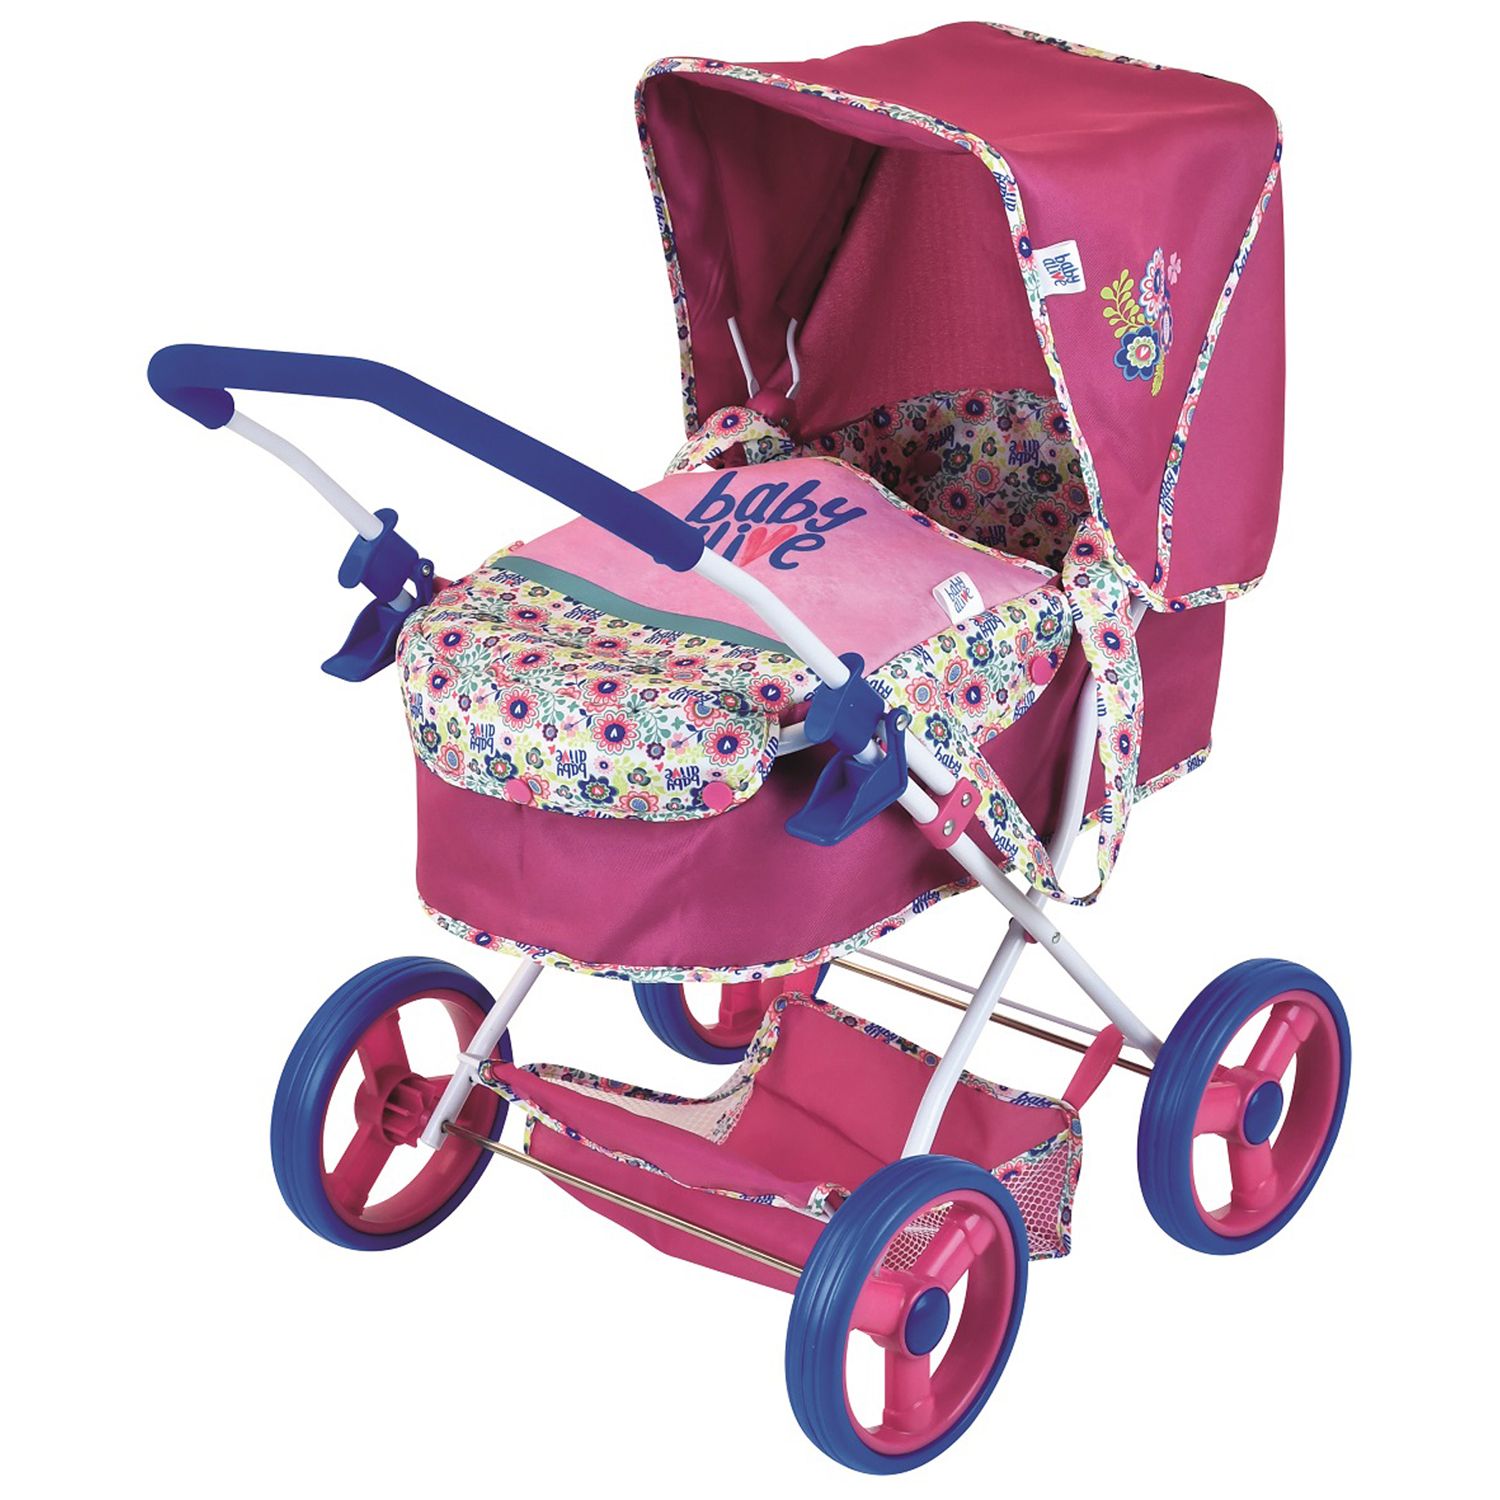 baby alive twin stroller